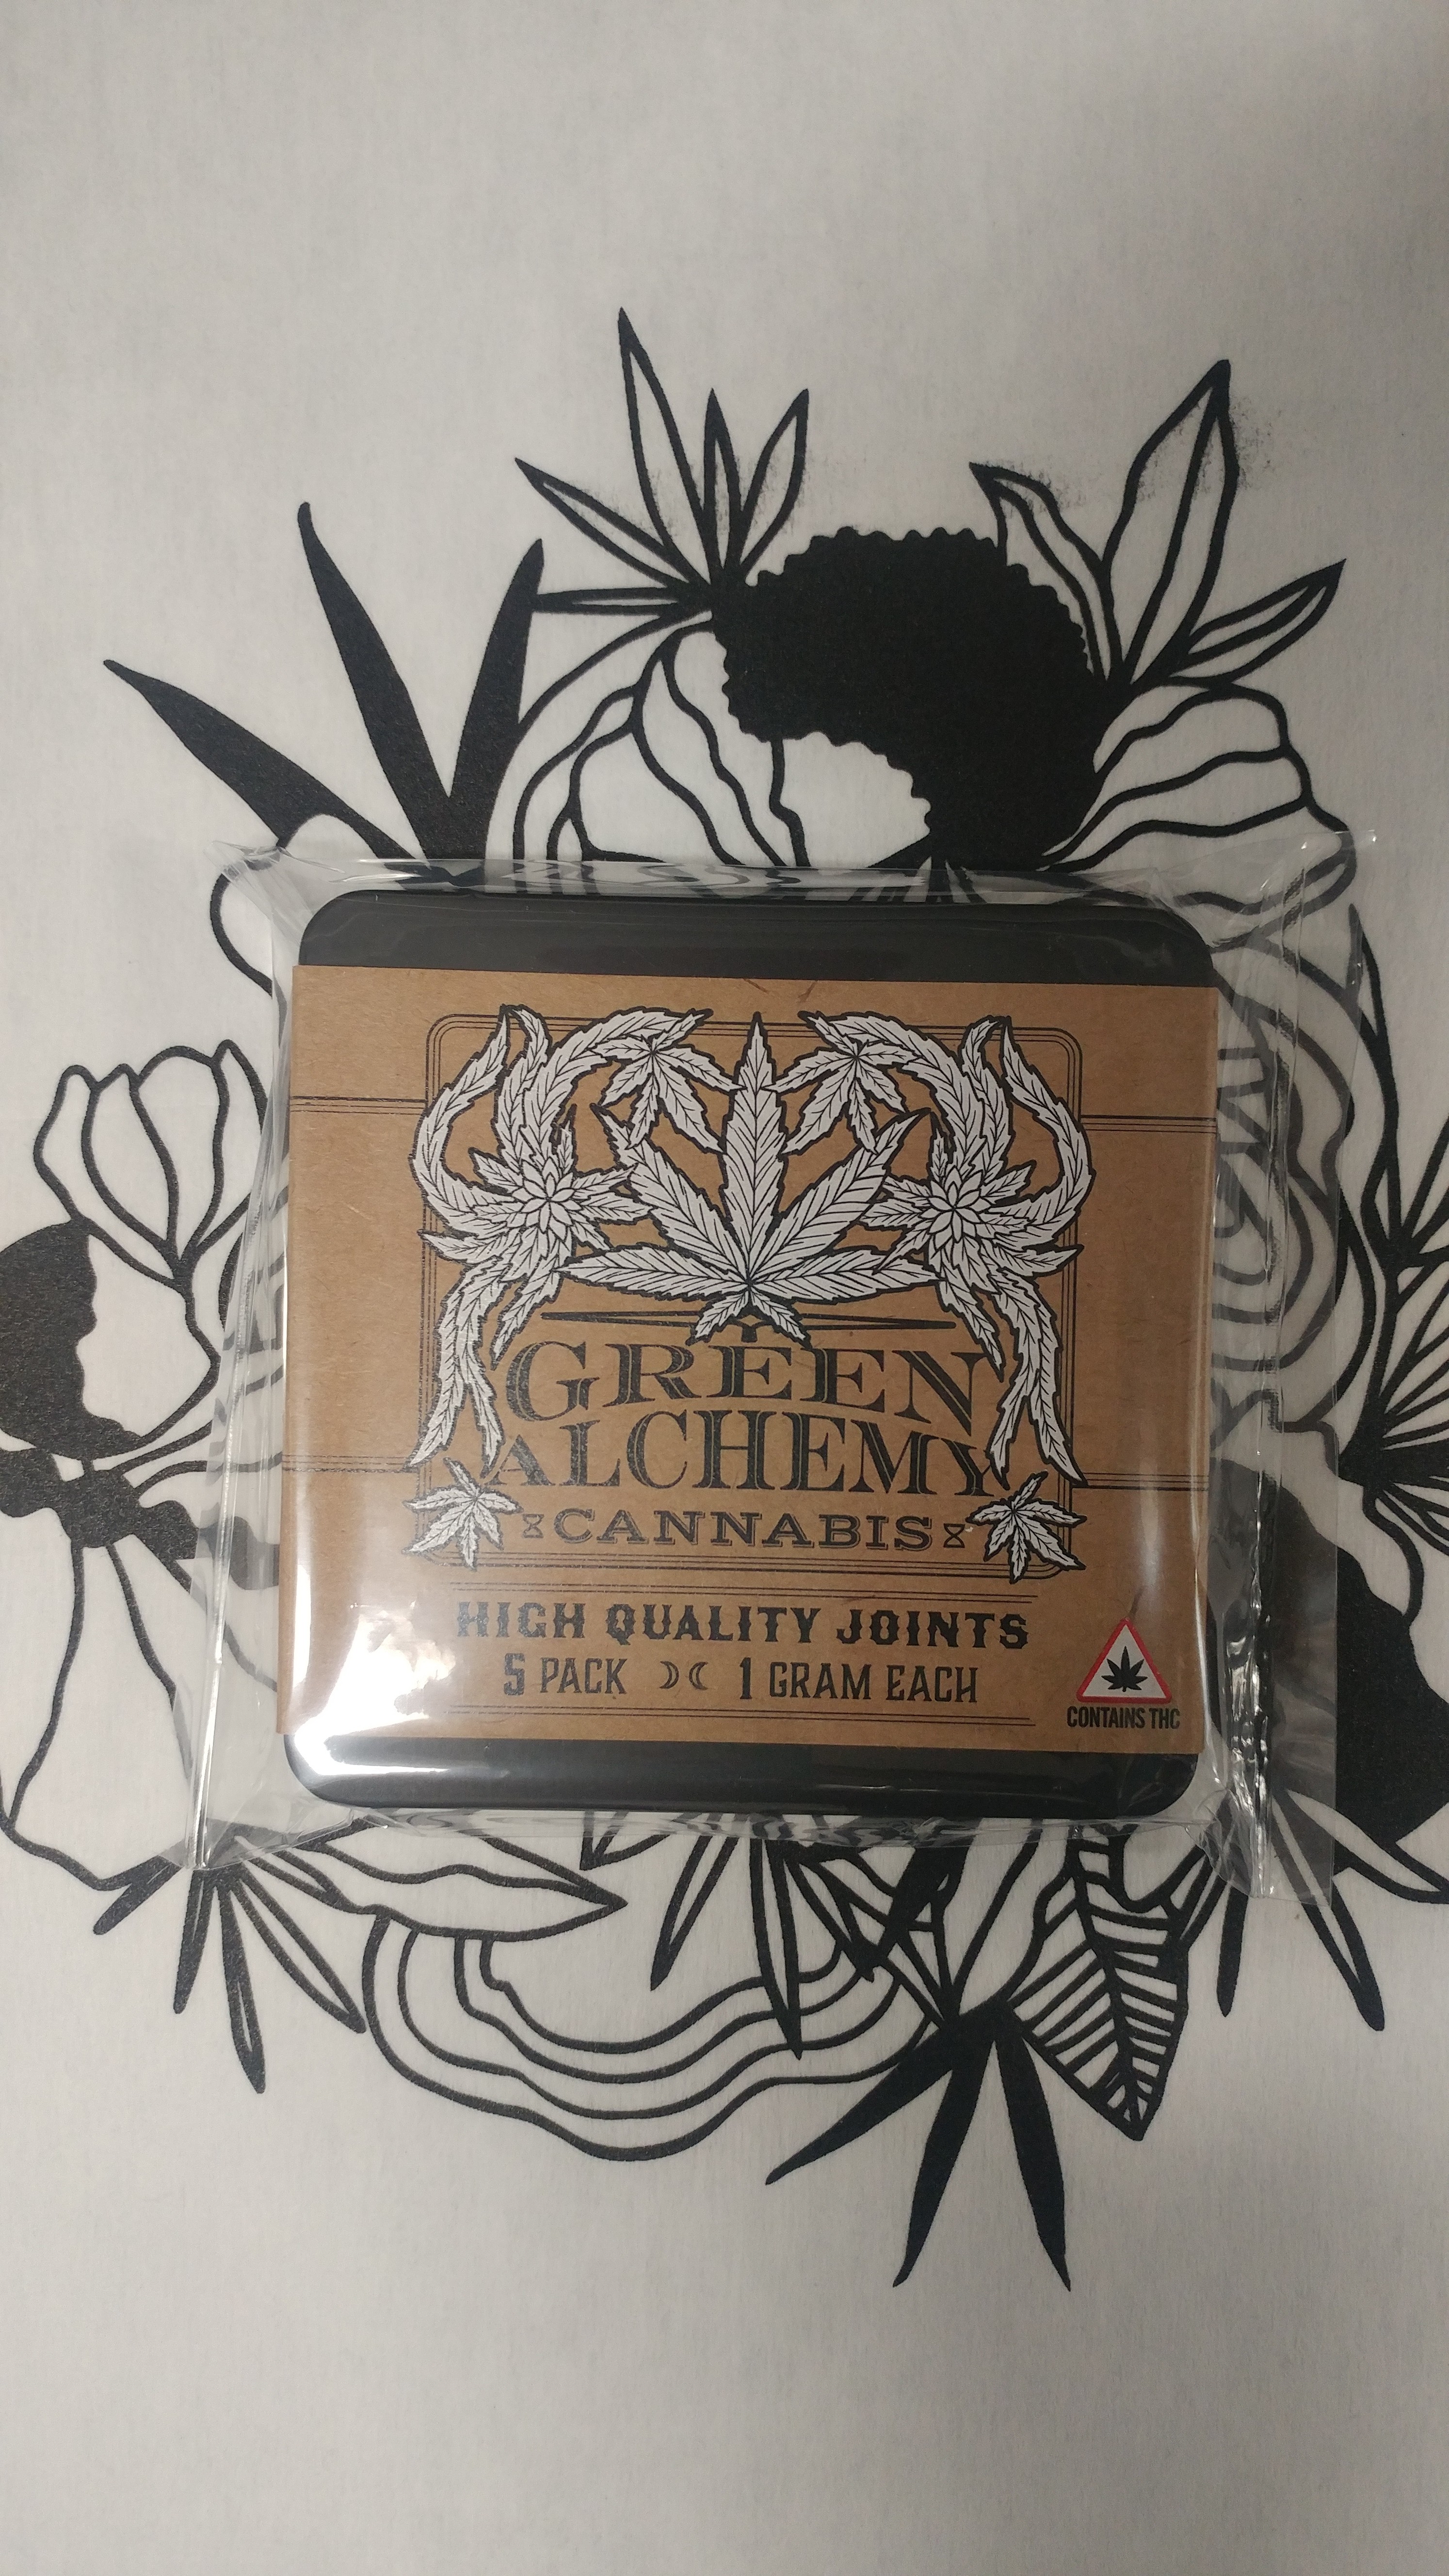 Green Alchemy Pineapple Express Pre-Roll 5 Pack